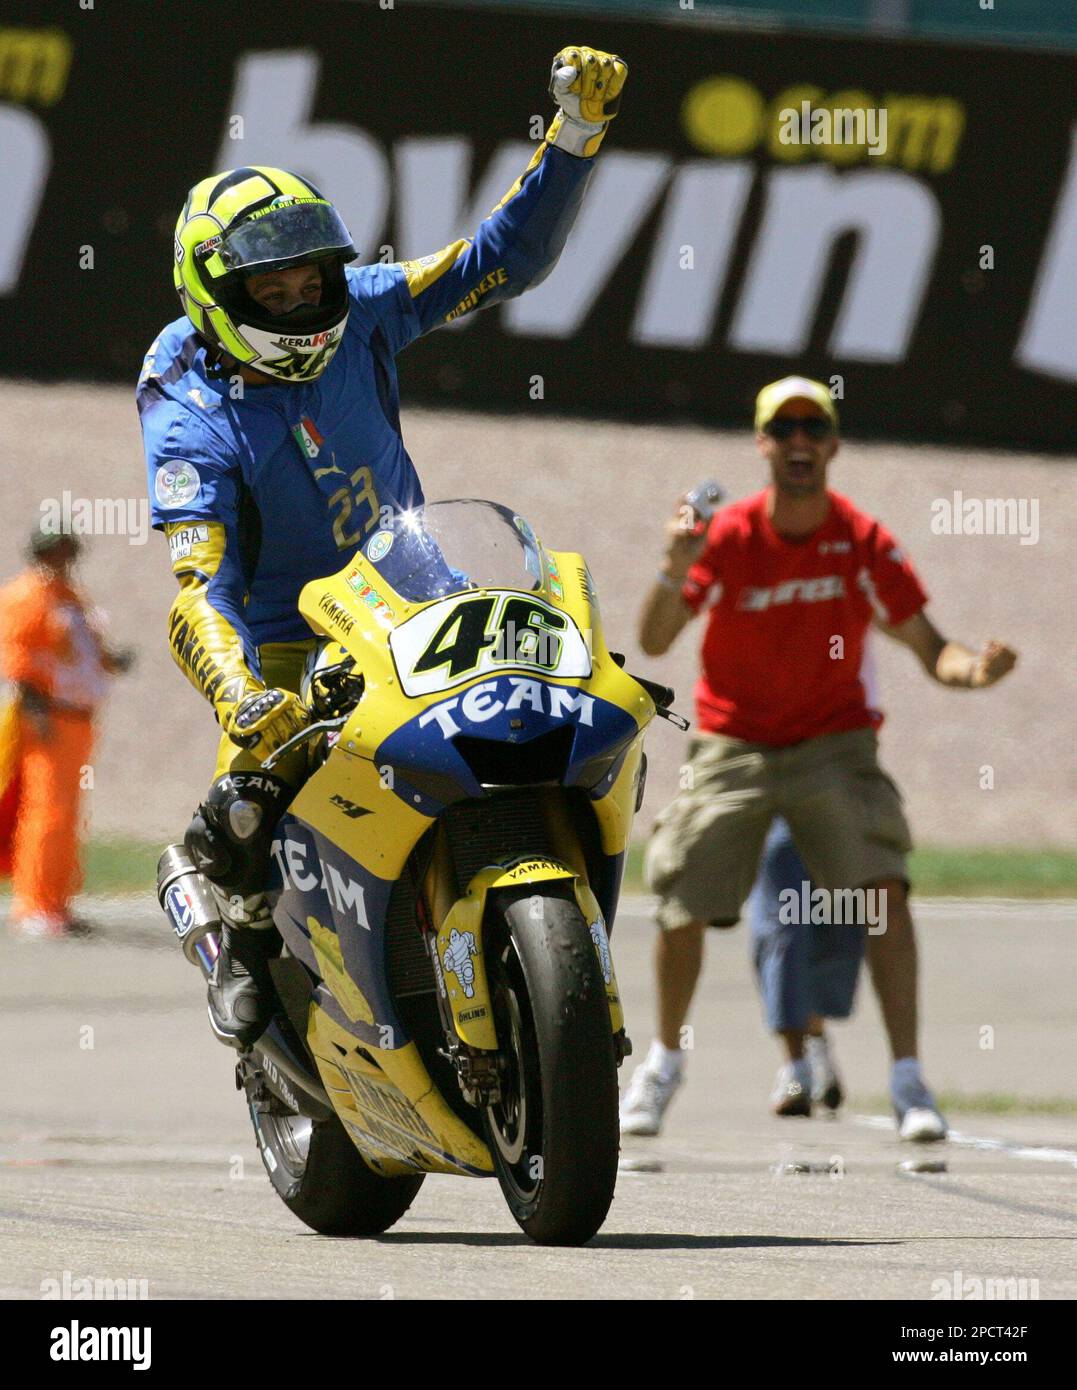 Italys Yamaha rider Valentino Rossi waves to fans after he won the MotoGP race of the Moto Grand Prix of Germany at the Sachsenring circuit in Hohenstein-Ernstthal, eastern Germany, Sunday, July 16,